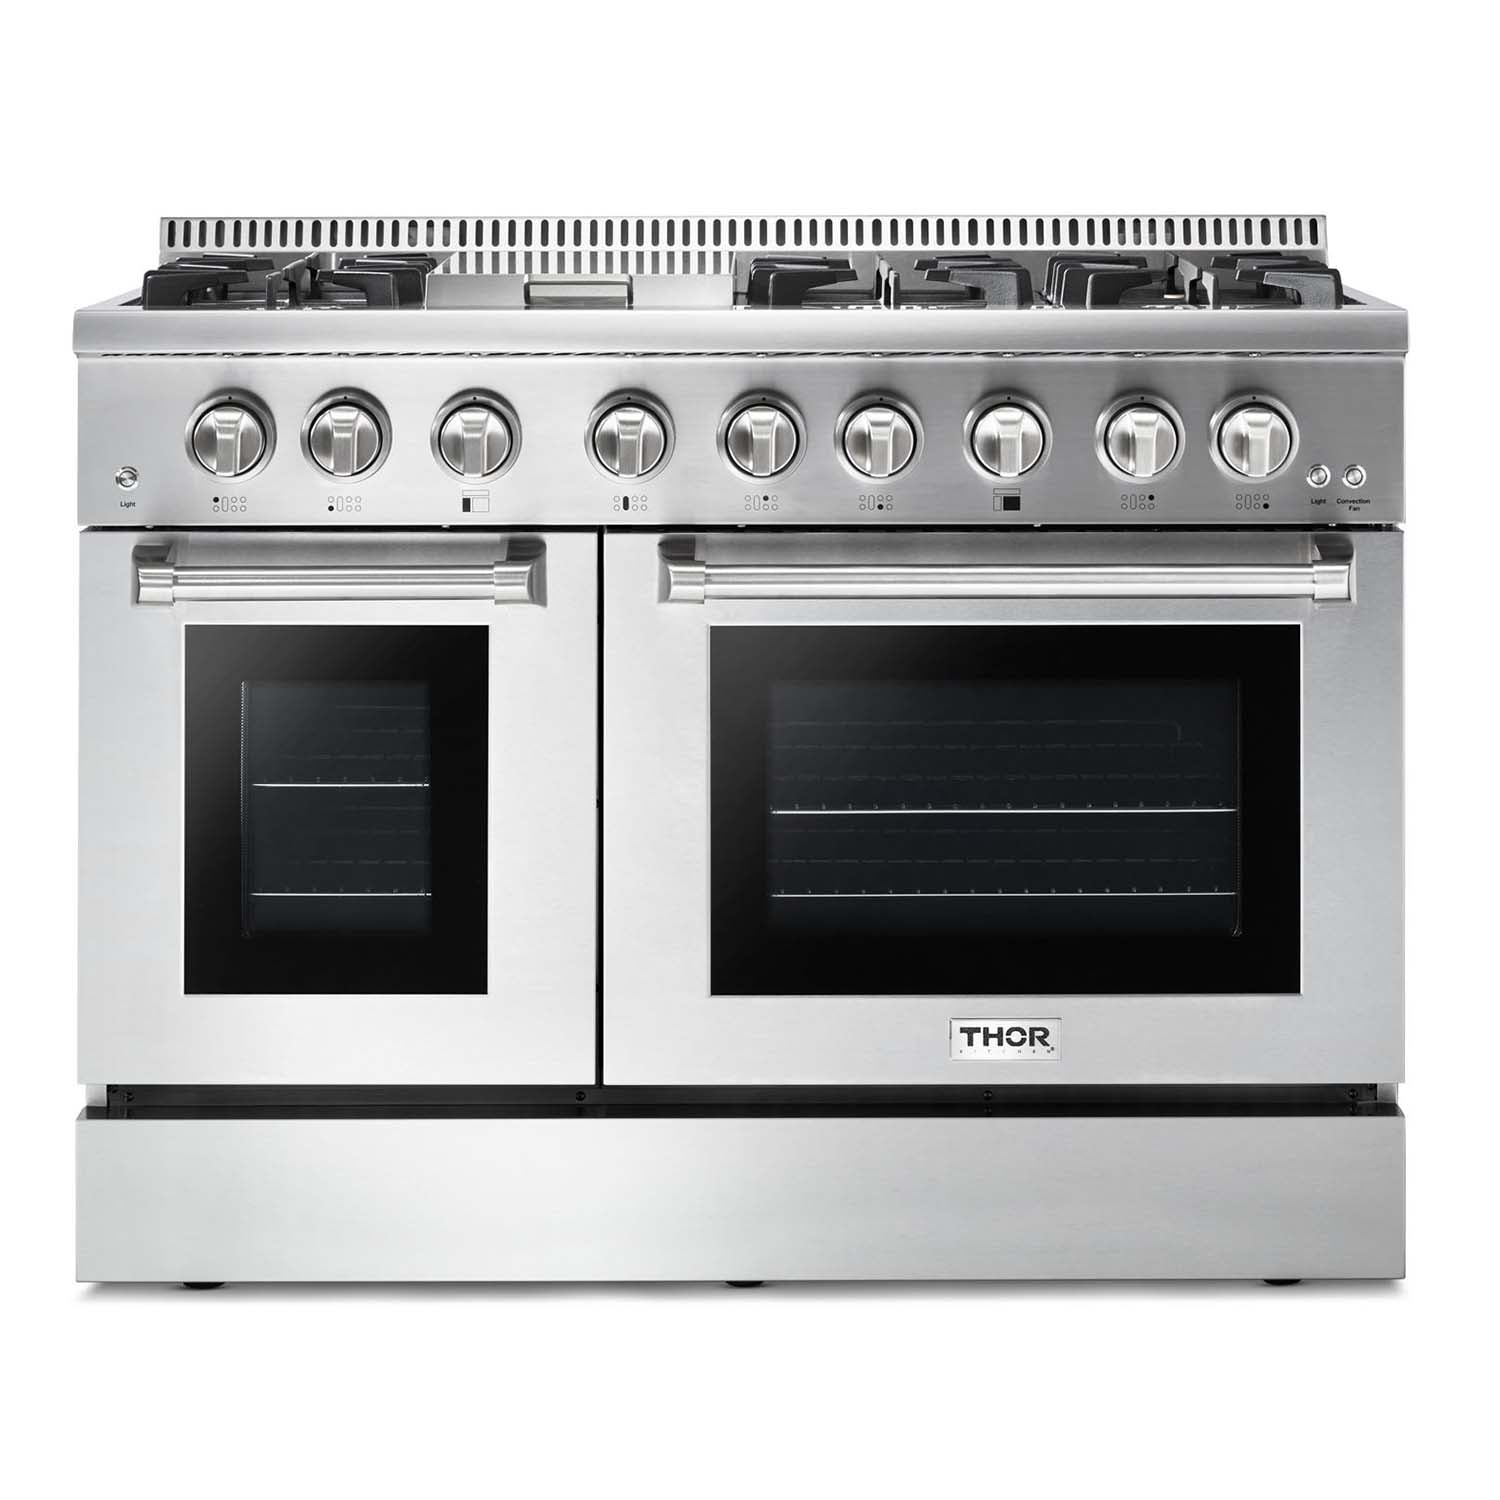 Thor Kitchen 48 Inch Professional Dual Fuel Range in Stainless Steel - HRD4803U